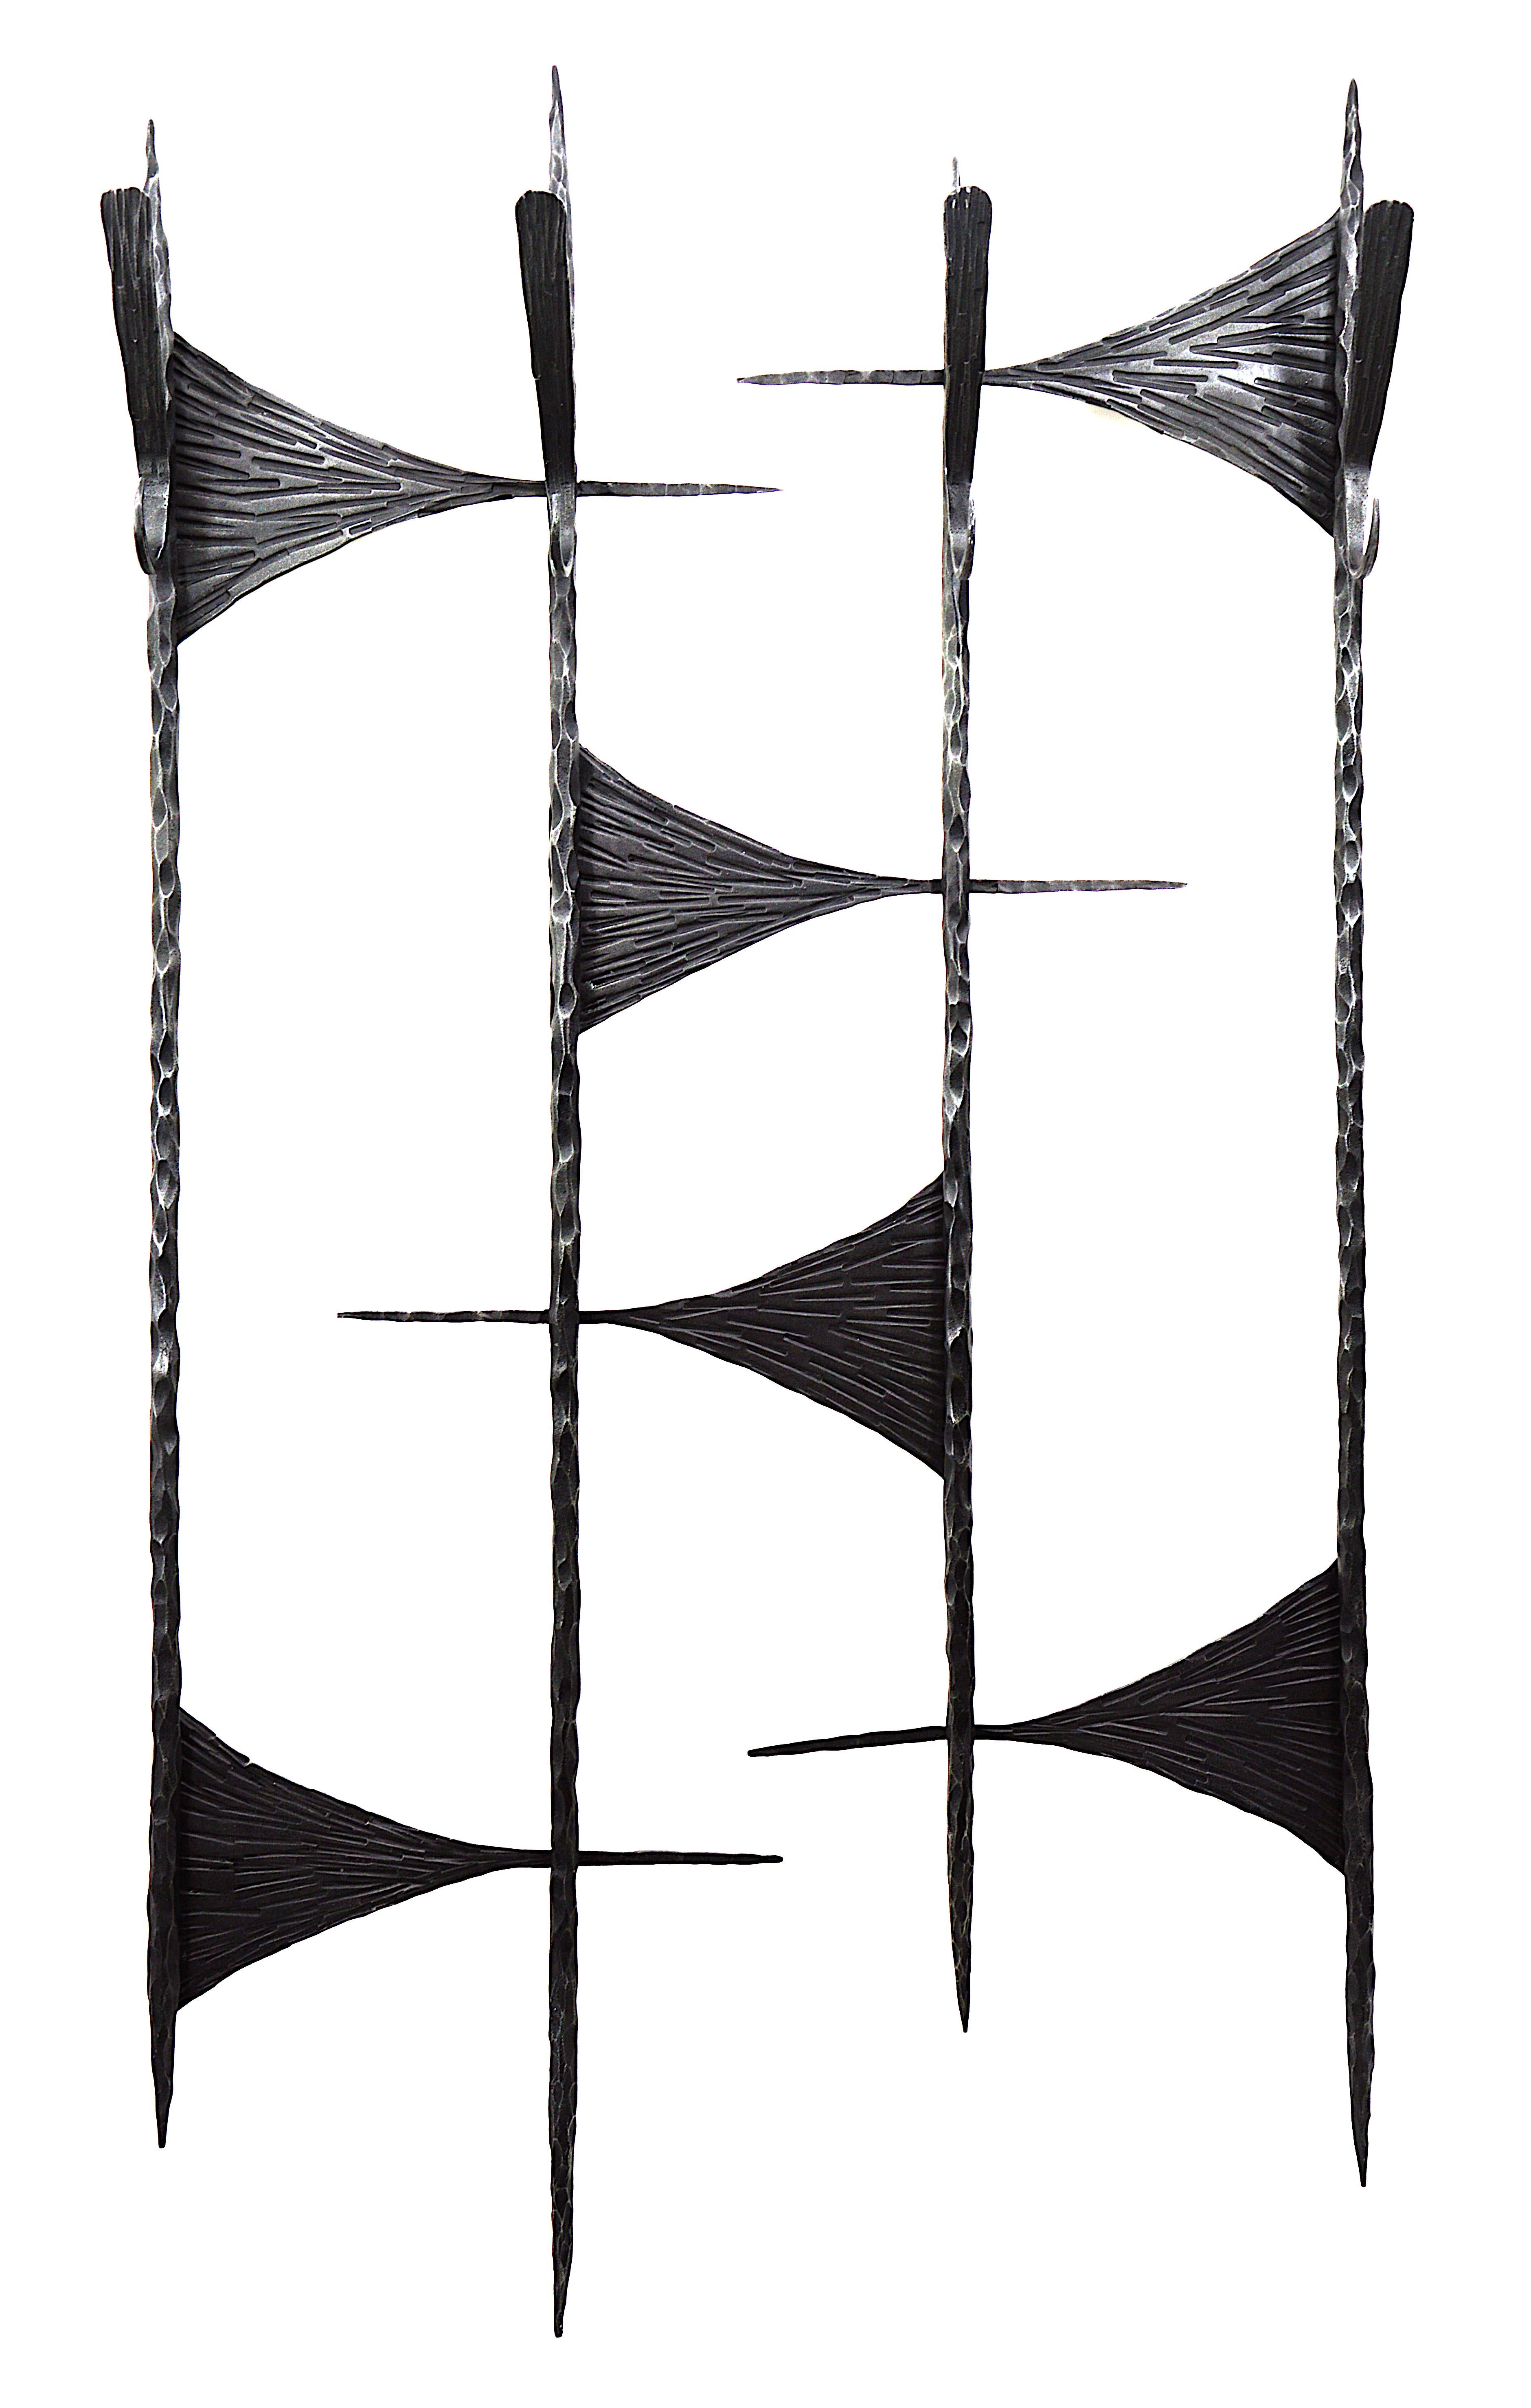 French midcentury coat-peg, France, 1960s. Wrought iron. Dimensions: H 124 x W 68 x D 14 cm, H 48.8 x W 26.8 x D 5.5 inches.